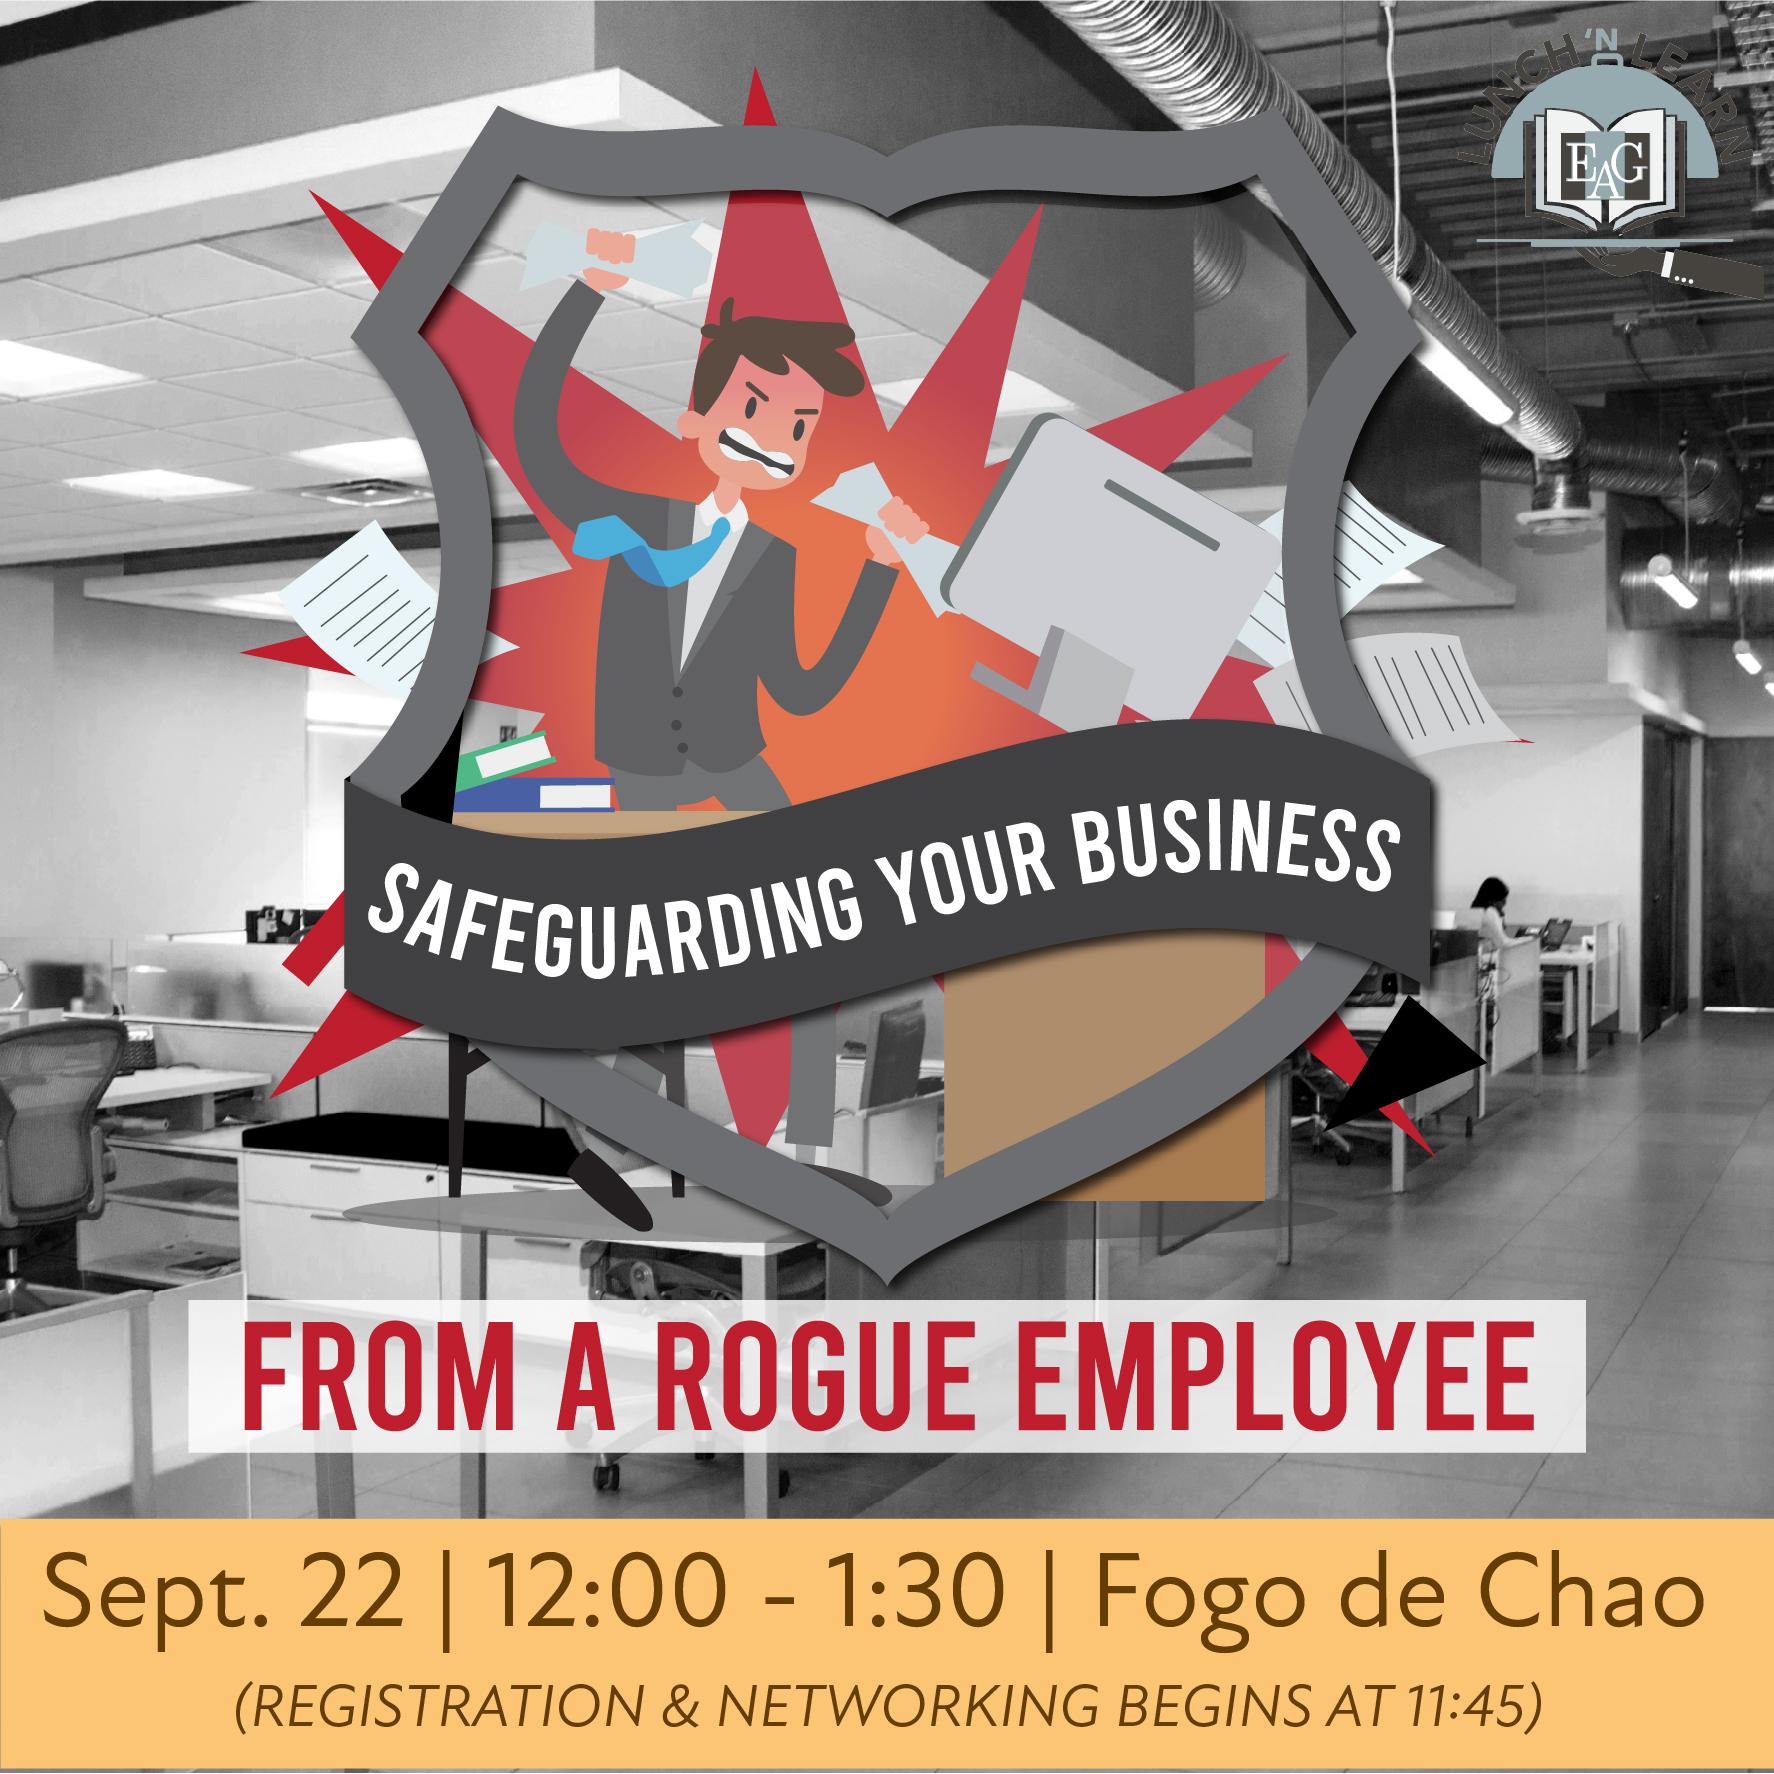 Safeguarding Business from Rogue Employees